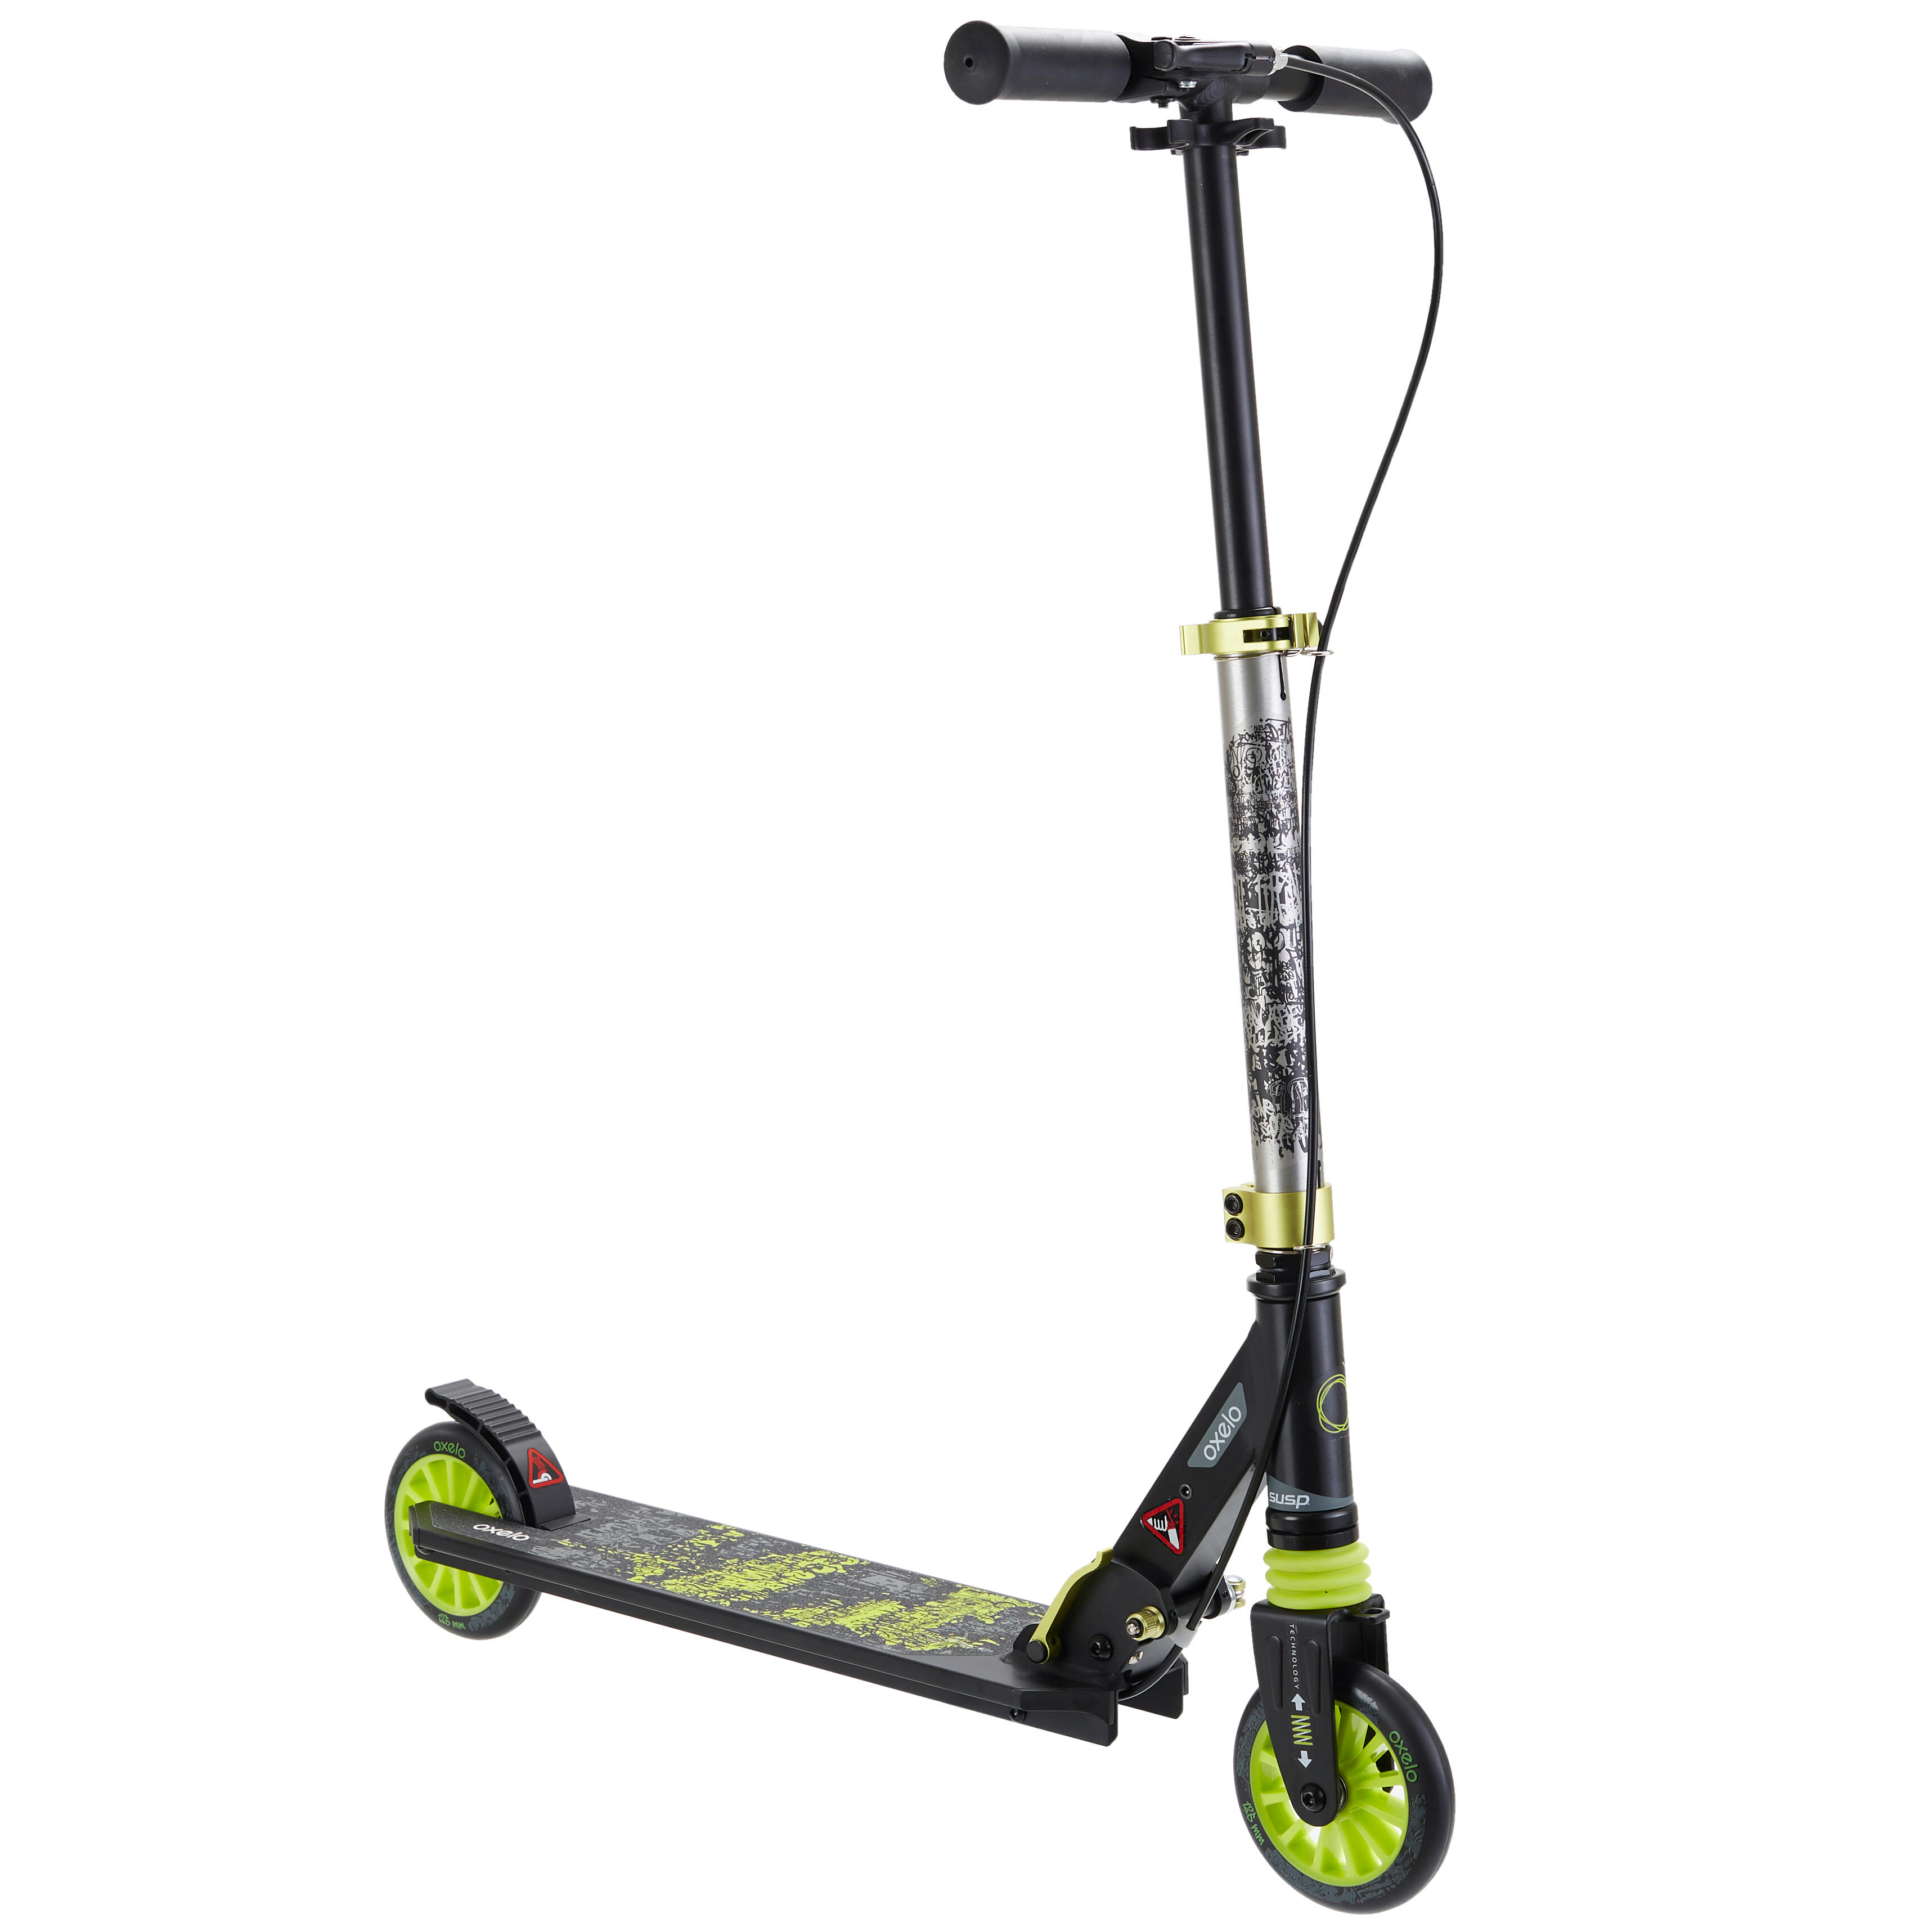 2 wheel scooter for 9 year old